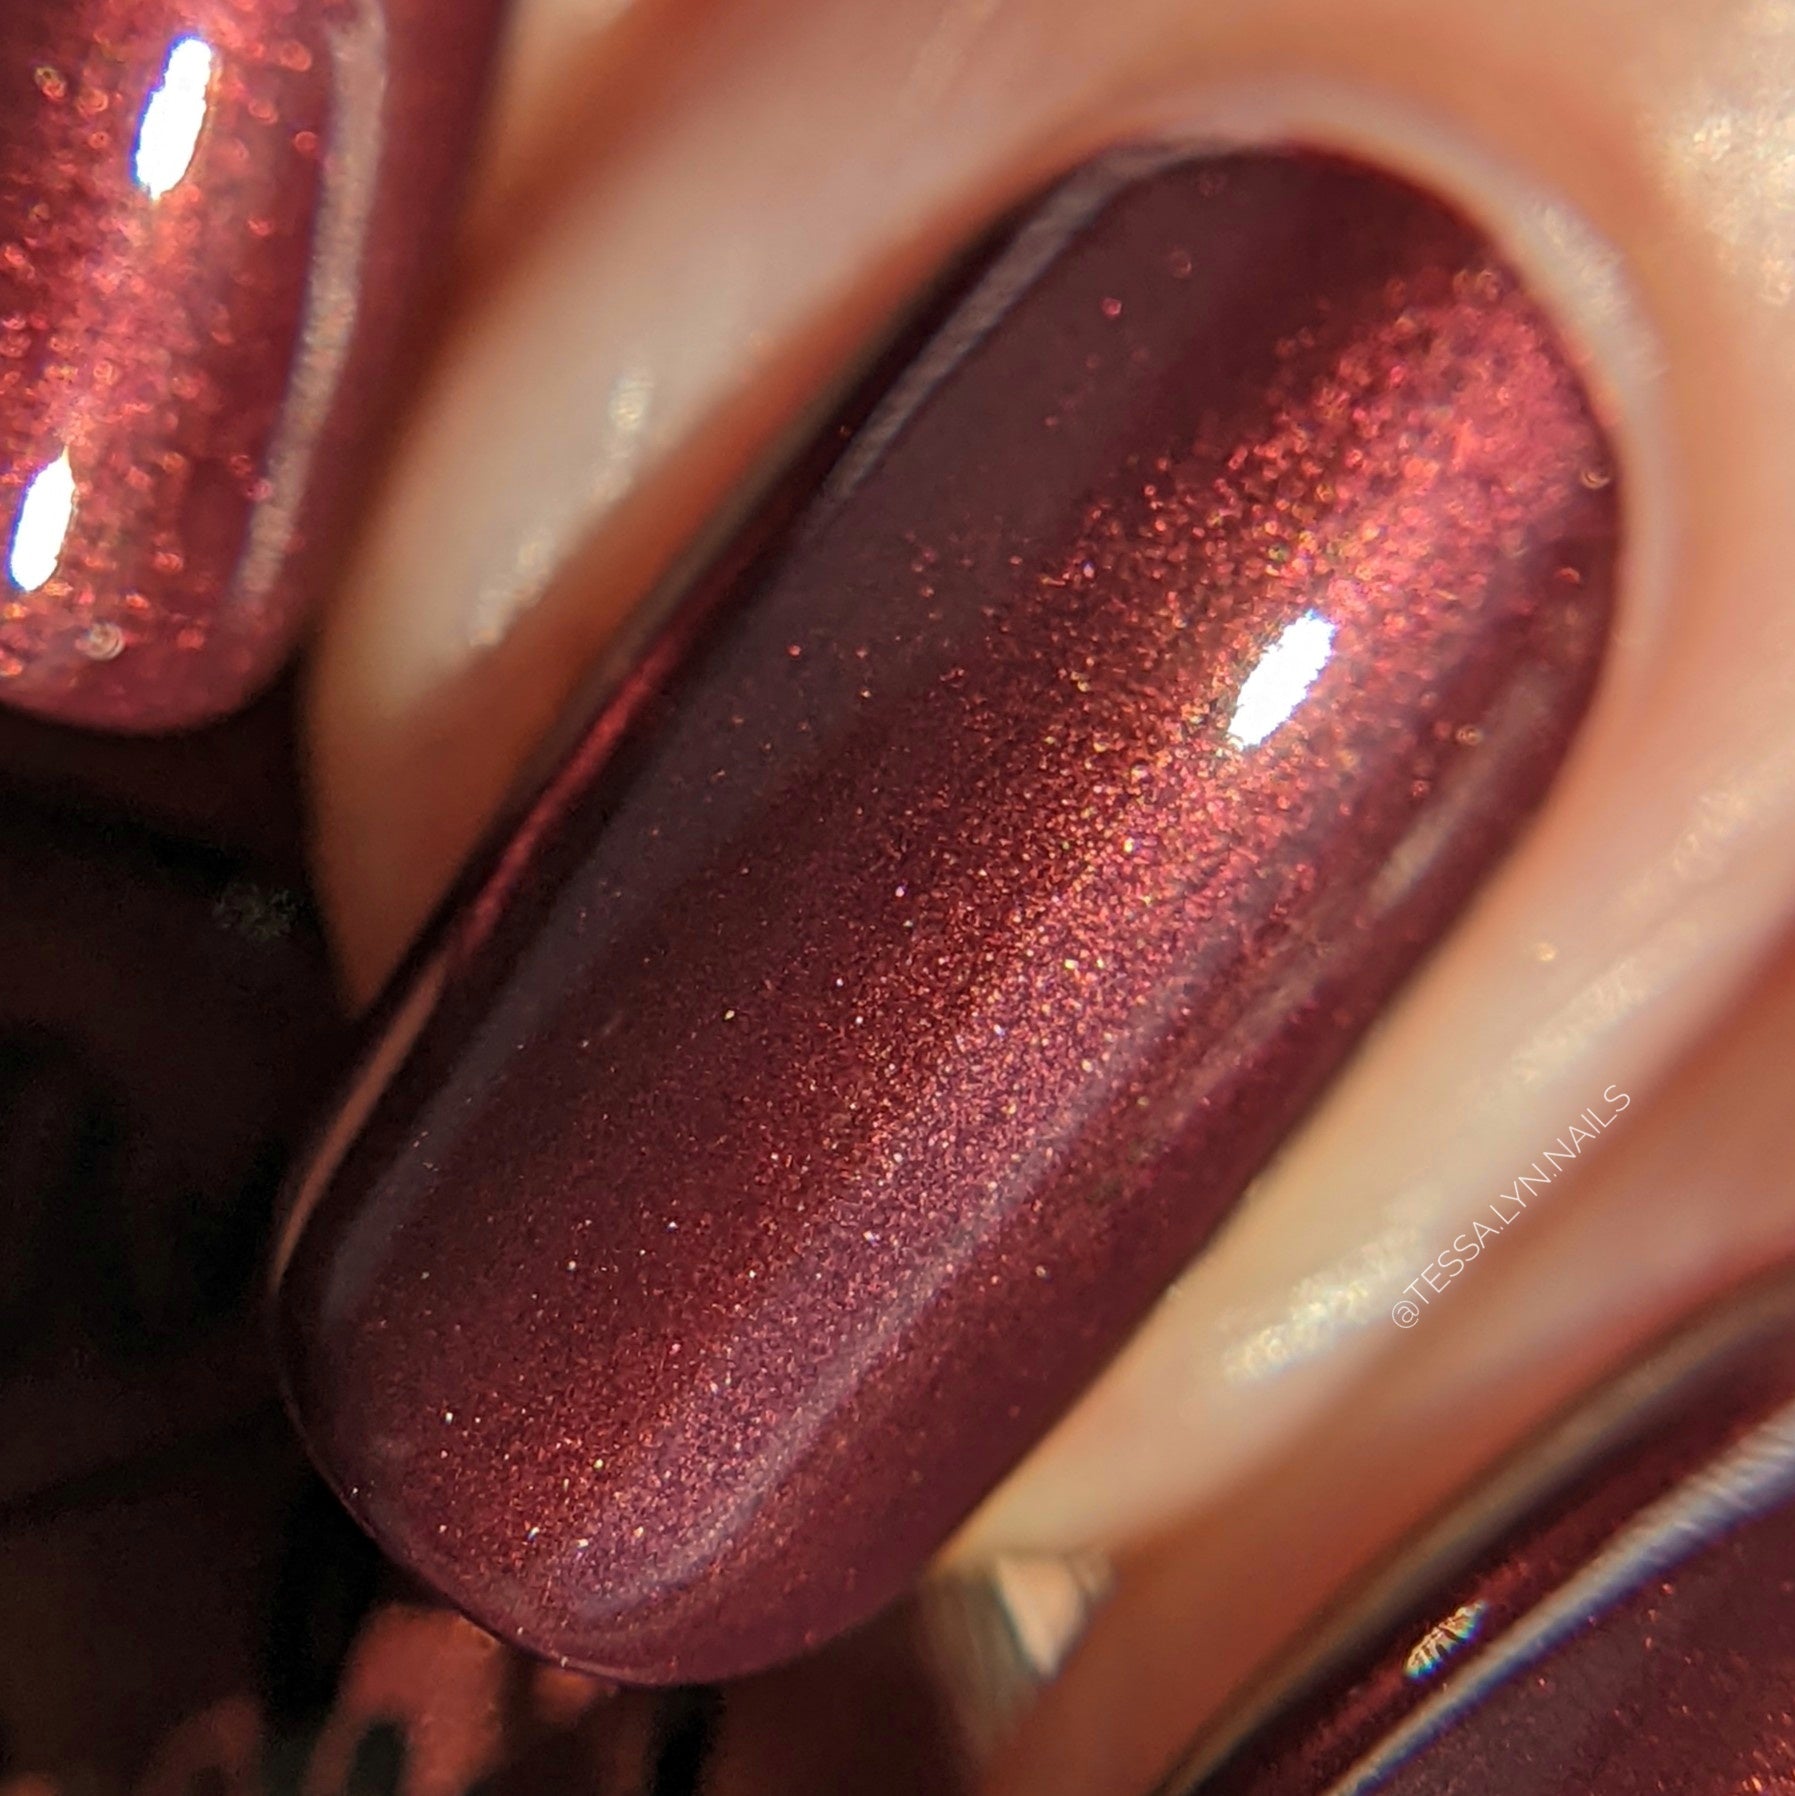 burgundy nail polish with gold shimmer swatch on pale skin tone